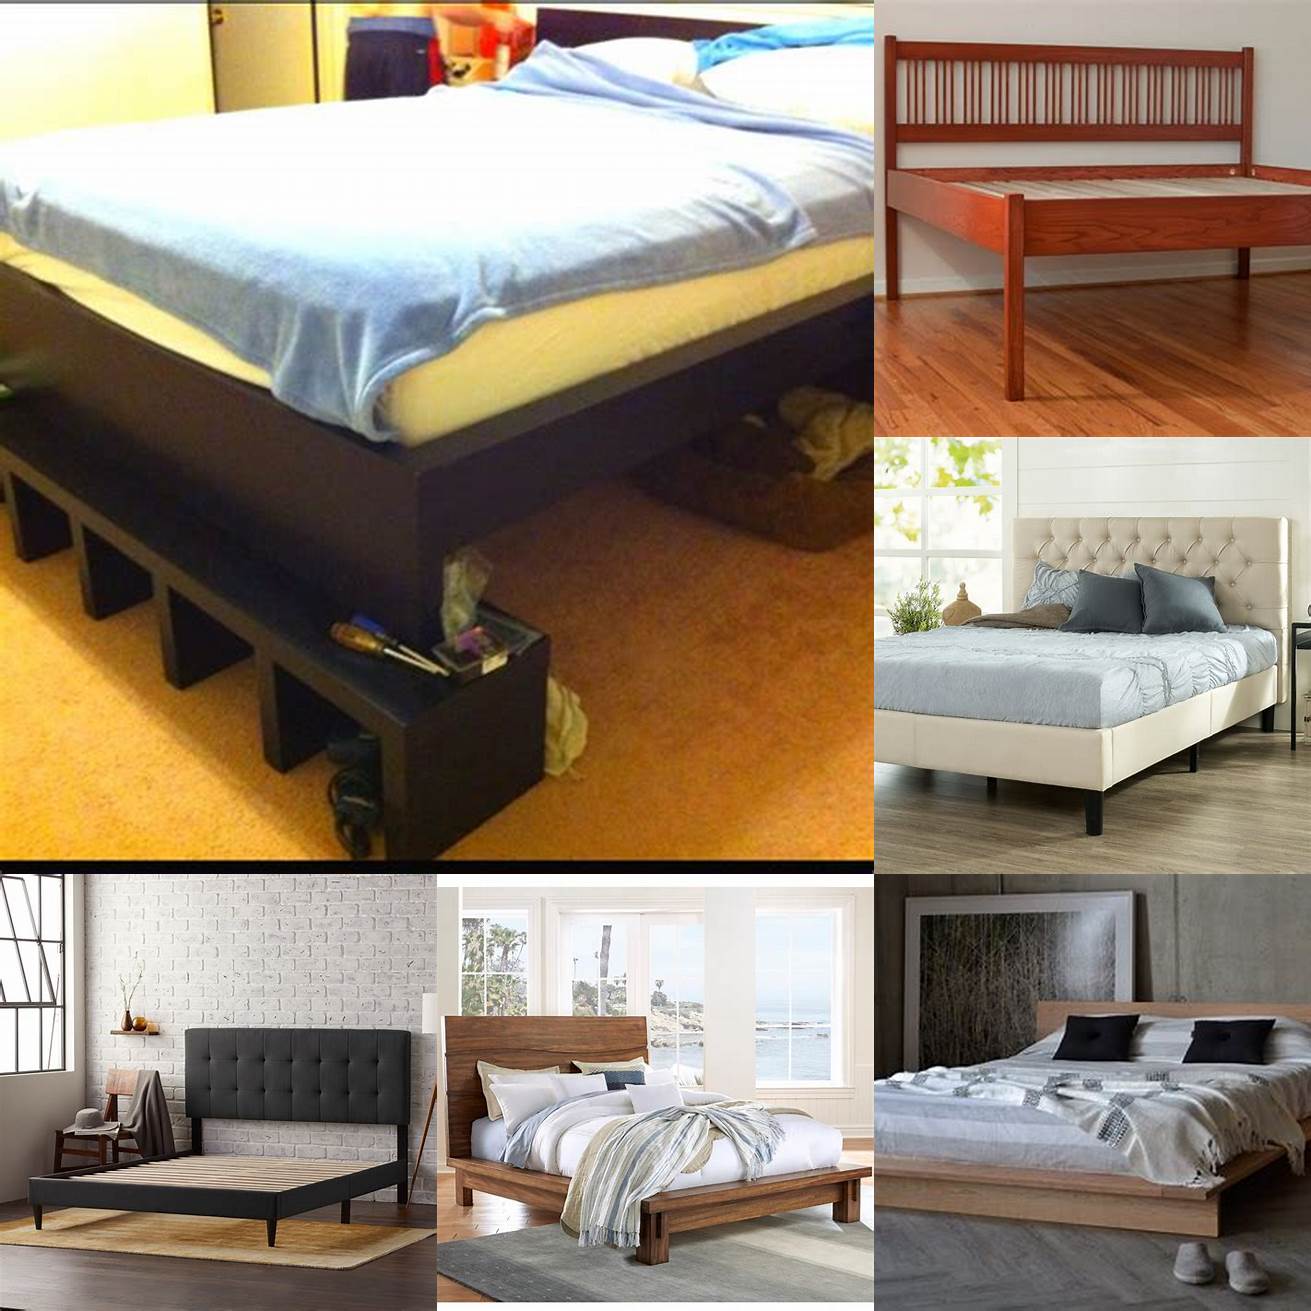 Height Platform beds are higher than traditional beds which can be uncomfortable for some people